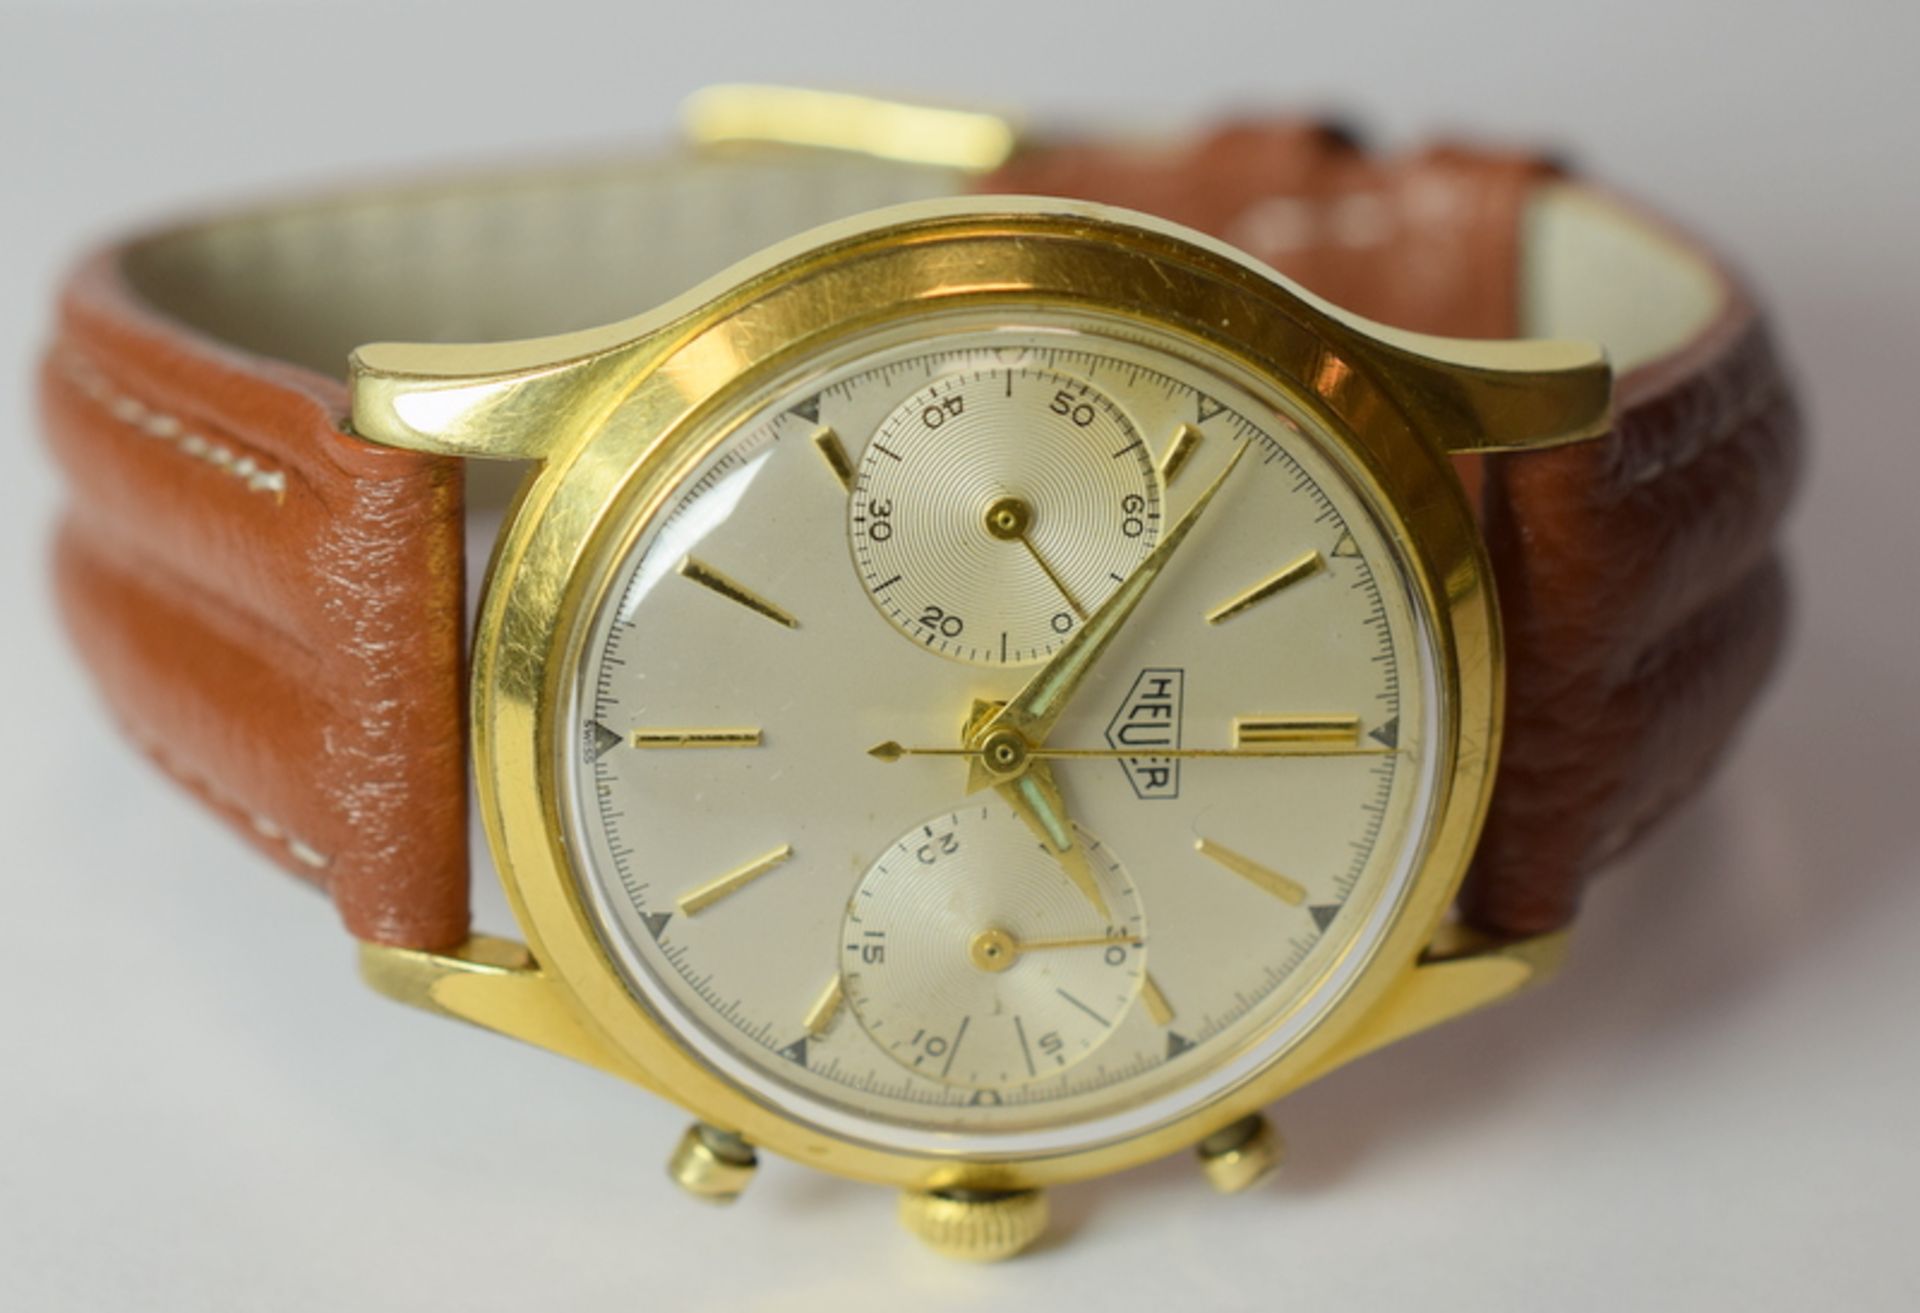 Lovely Heuer Chronograph c1960s Ed.Heuer Signed Movement ***reserve lowered*** - Image 5 of 7